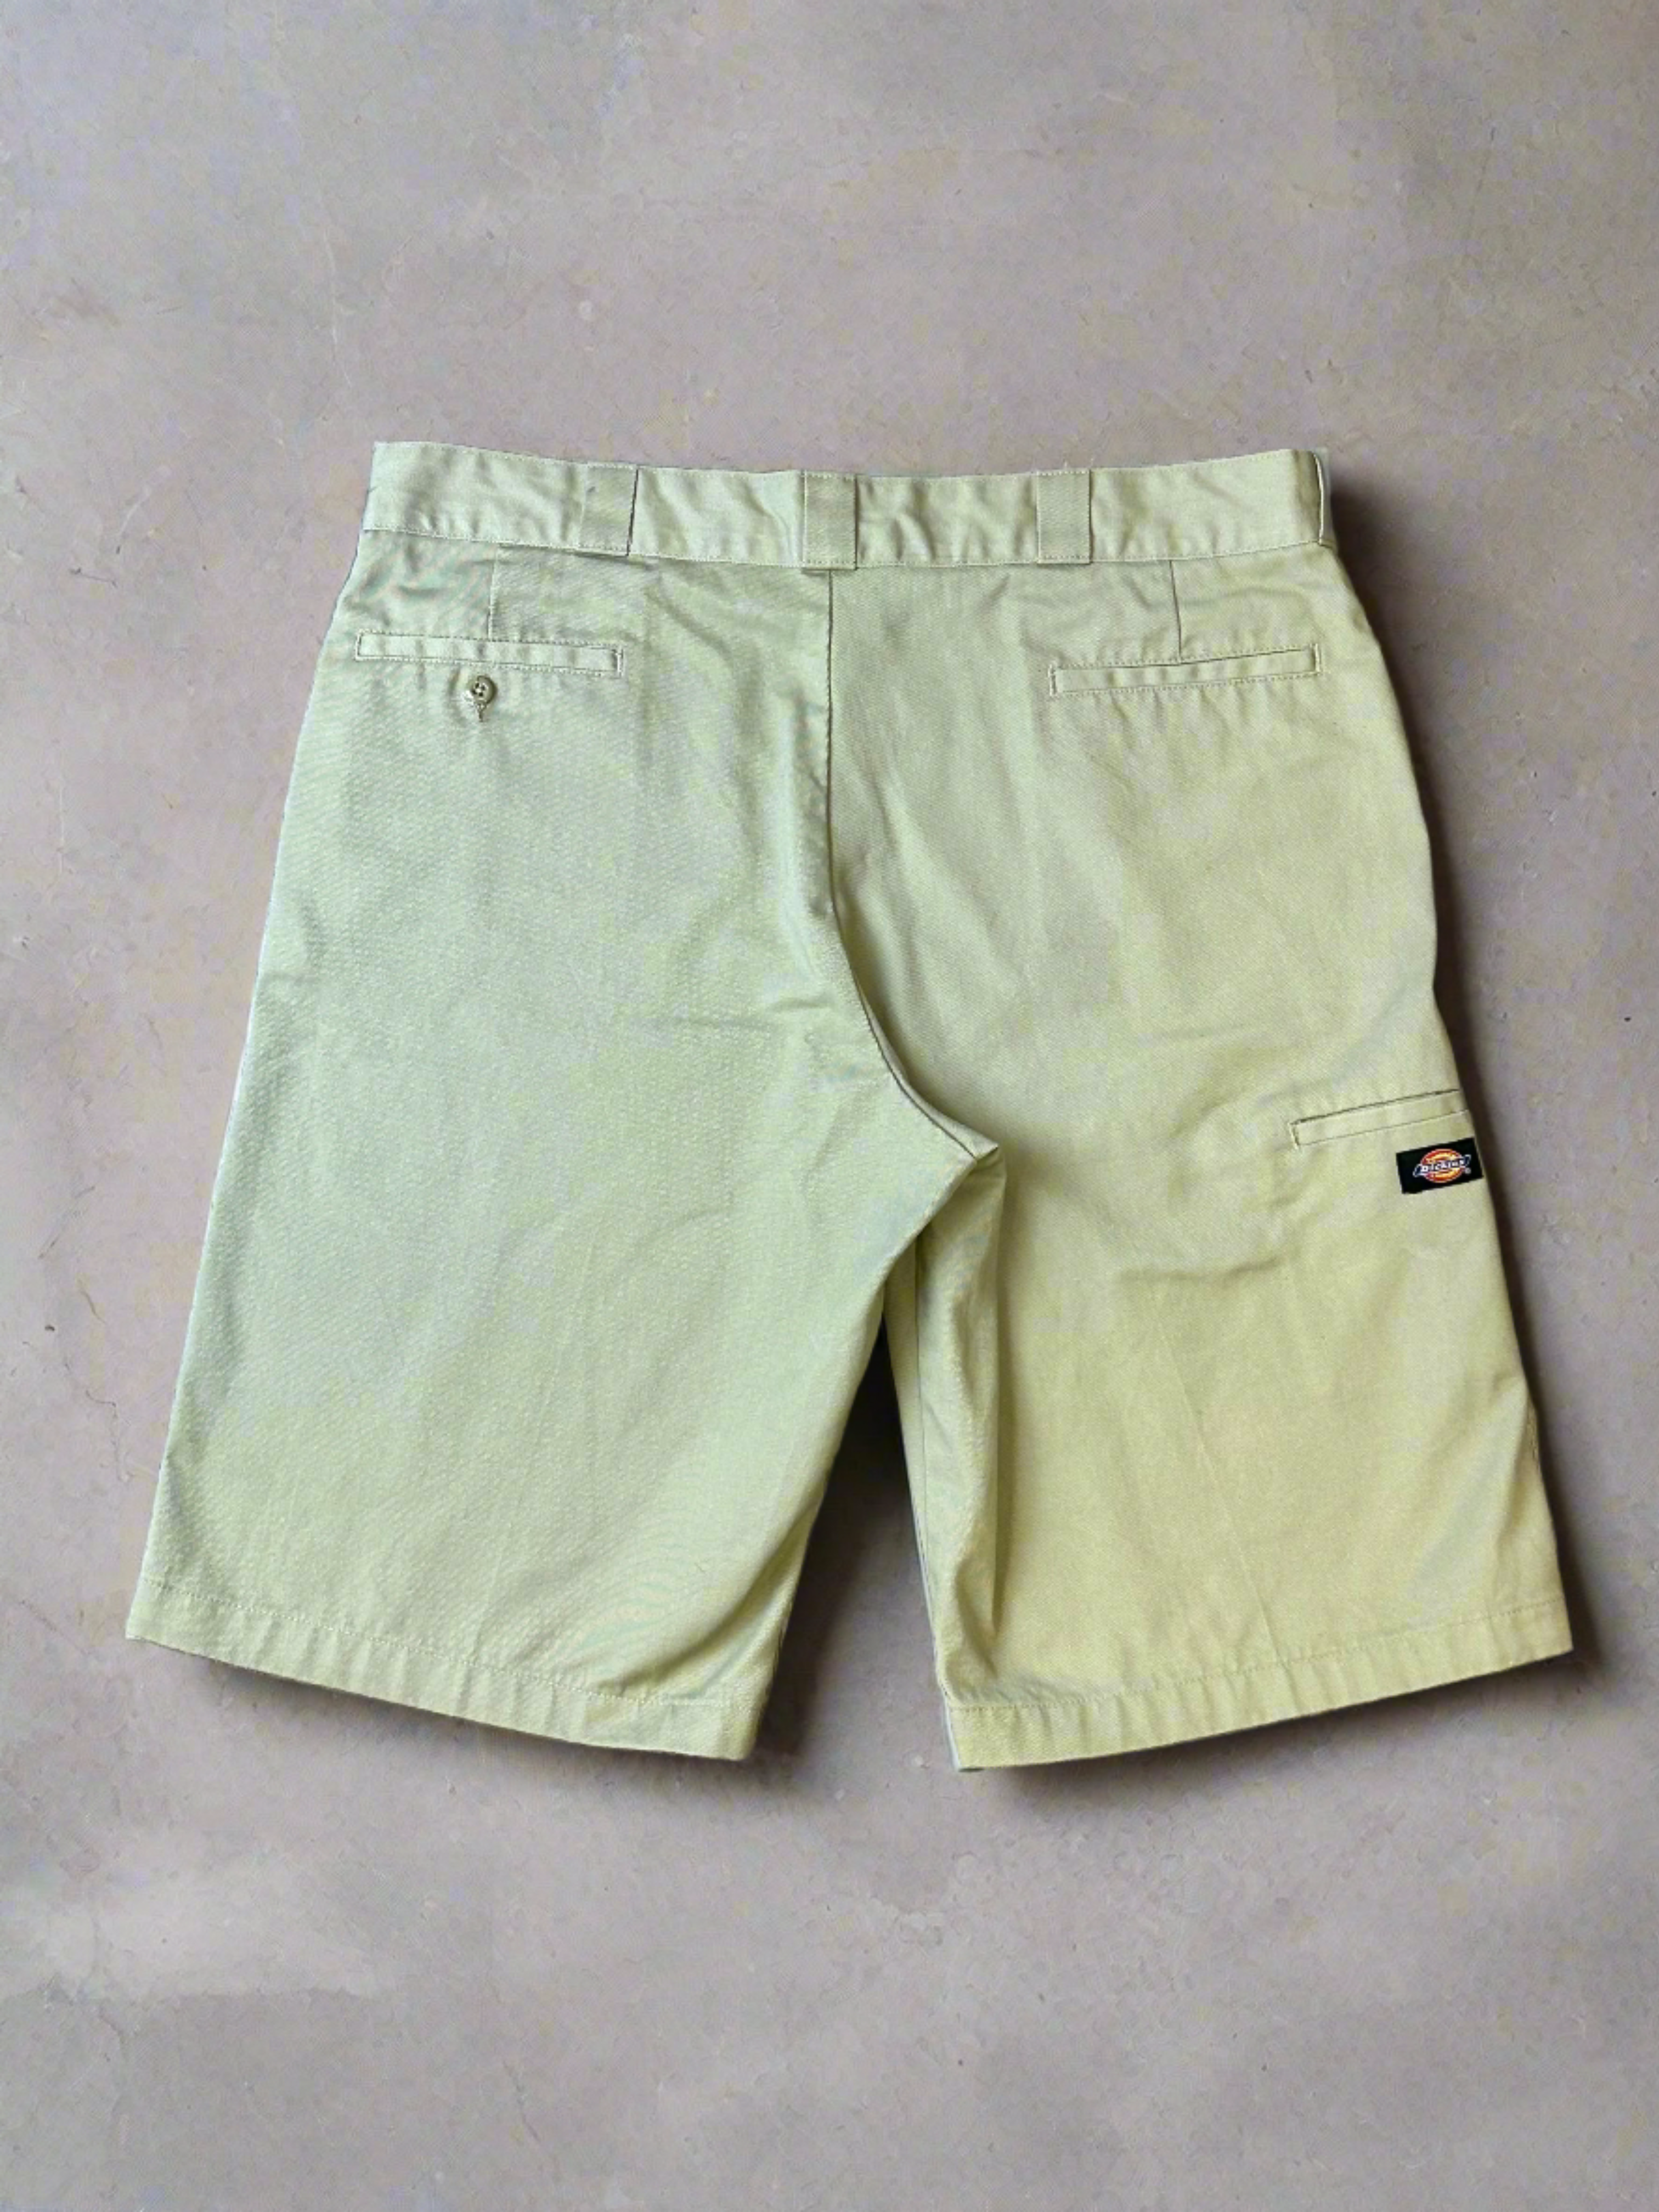 Vintage Dickies Cotton Shorts - size 36